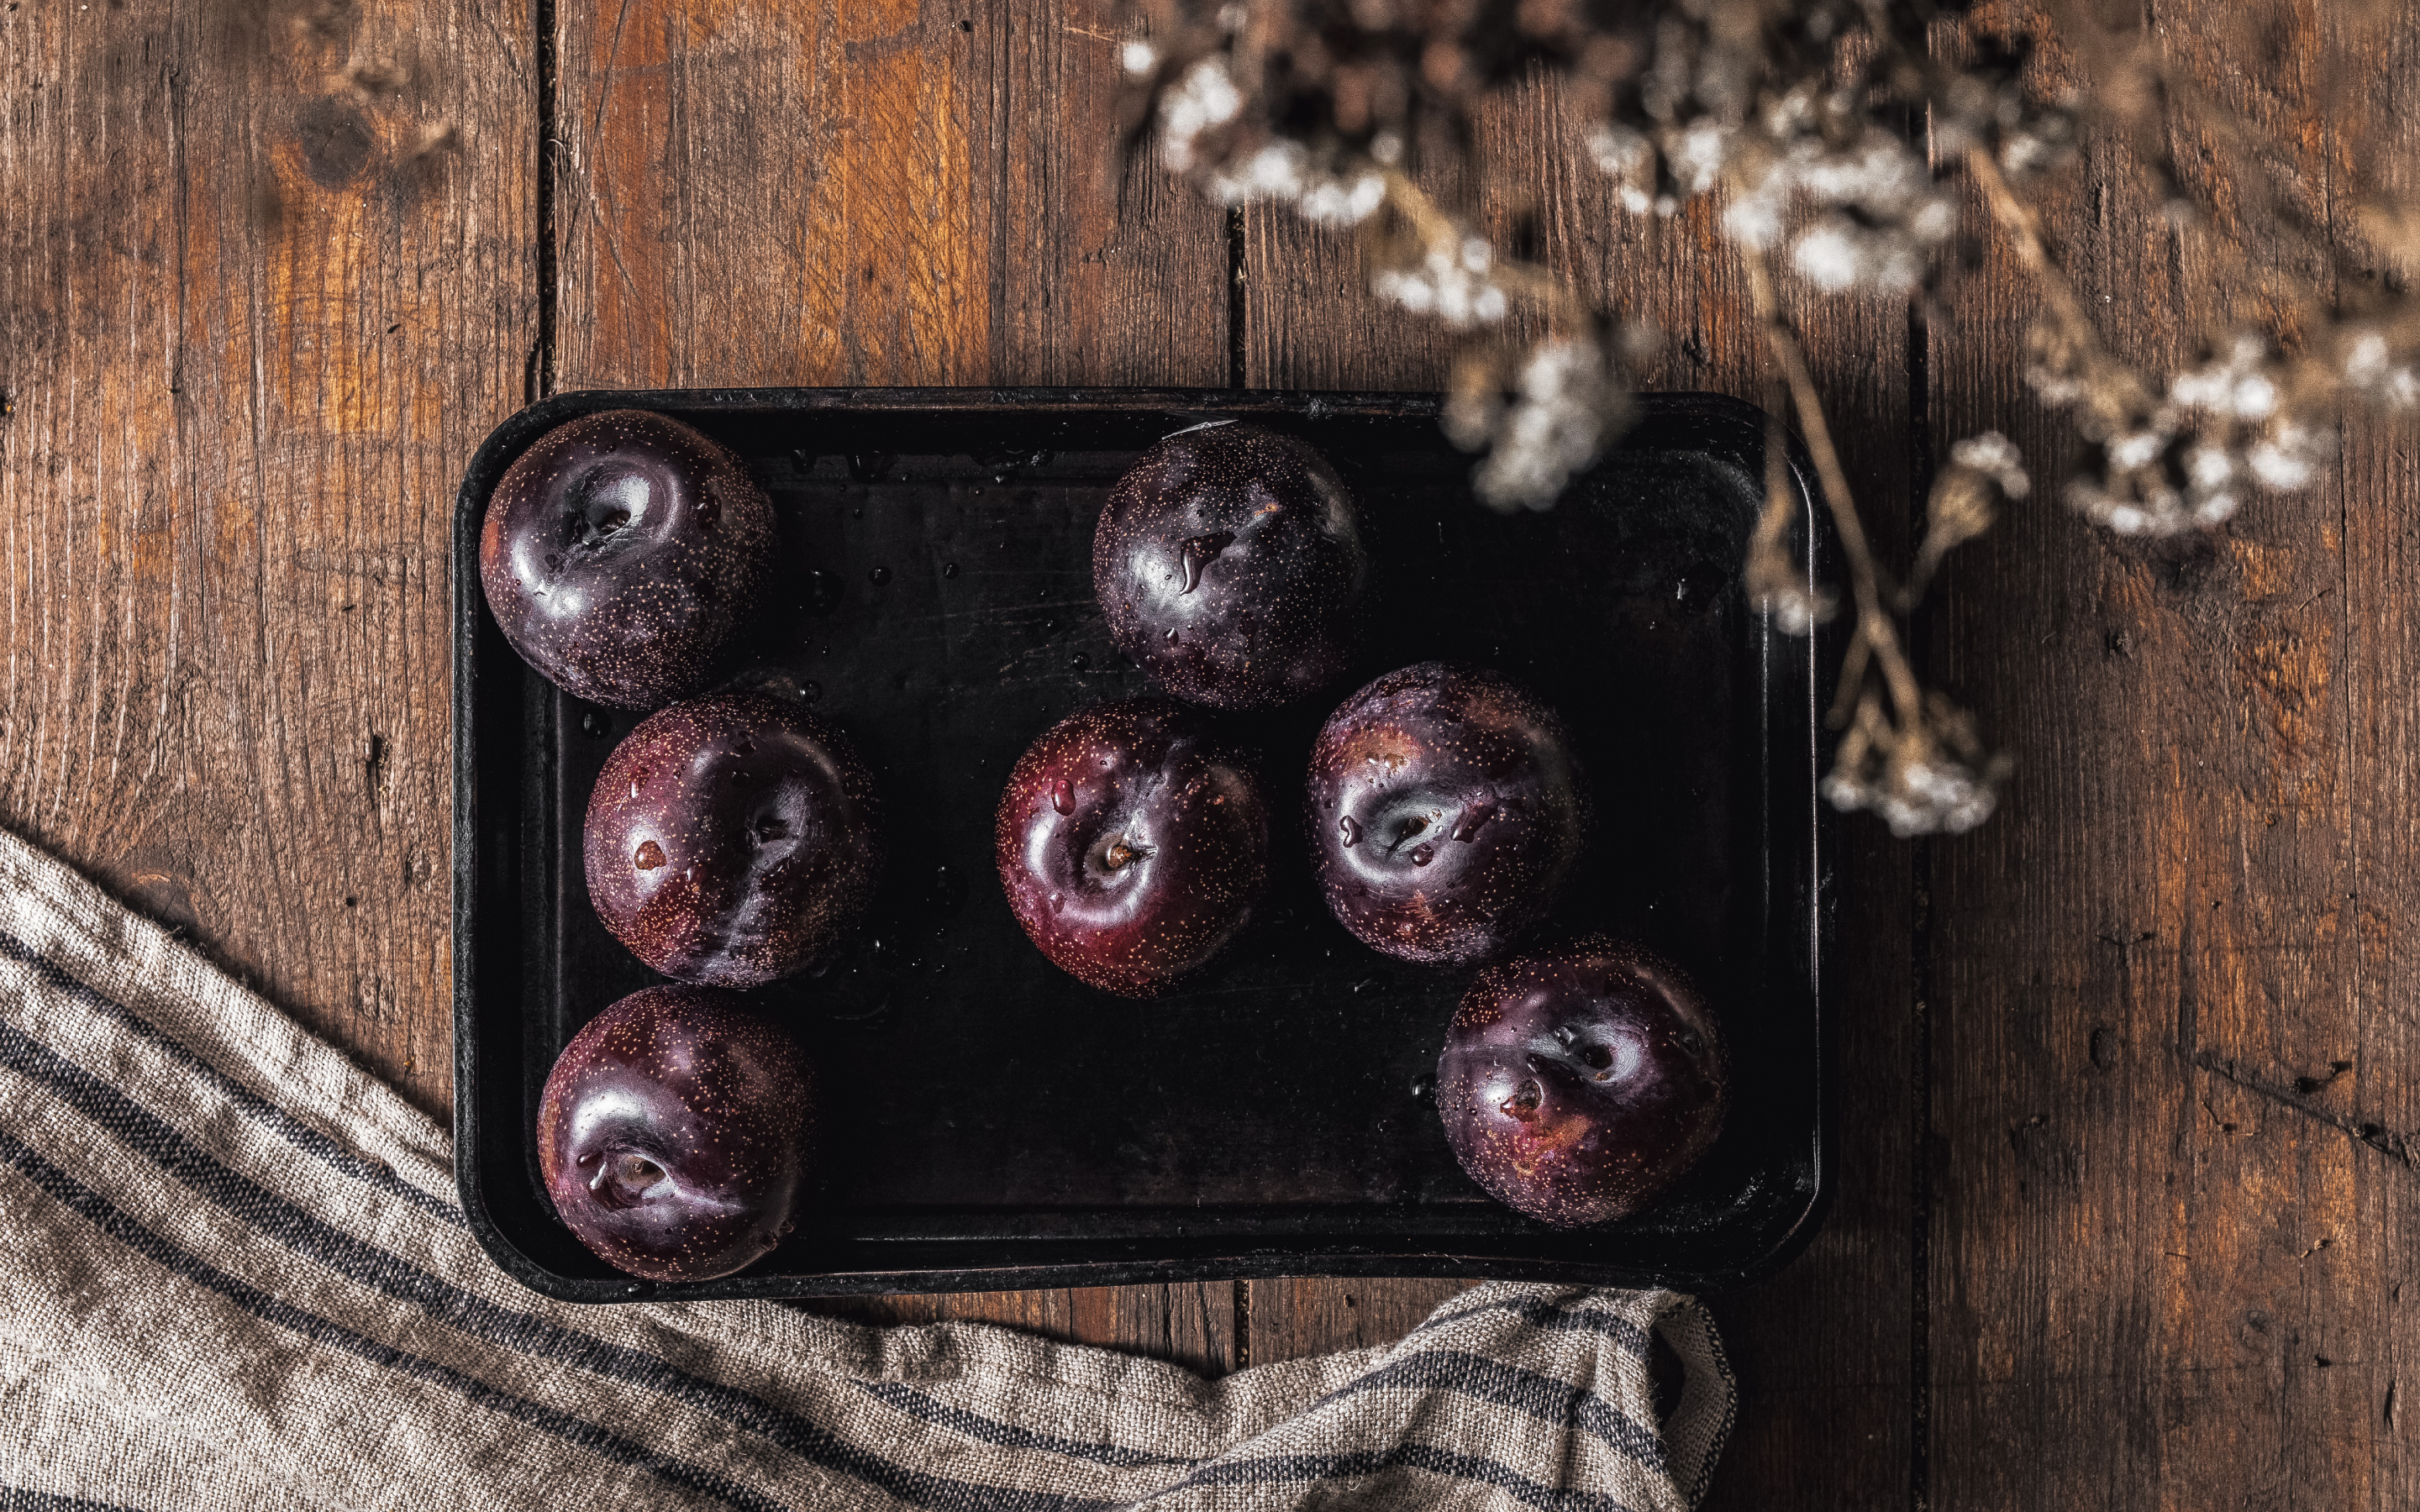 Tray of Queen Garnet plums sat on a wooden table